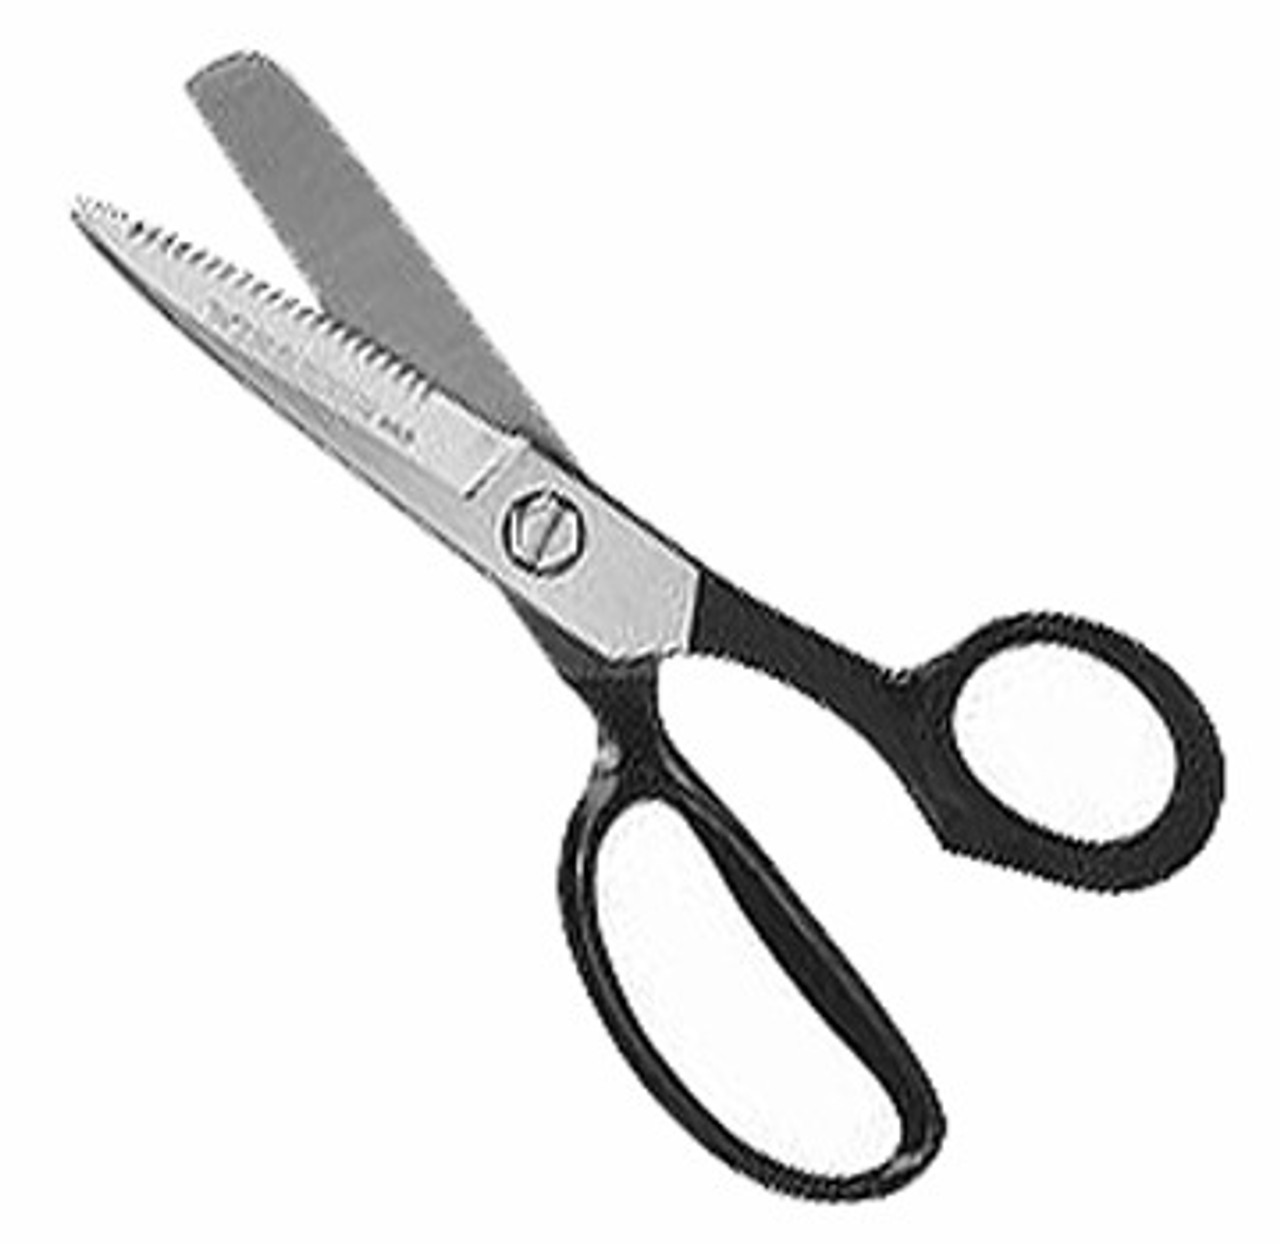 Wiss #8-BLT Leather and Belt Cutting Shears 8 1/4"